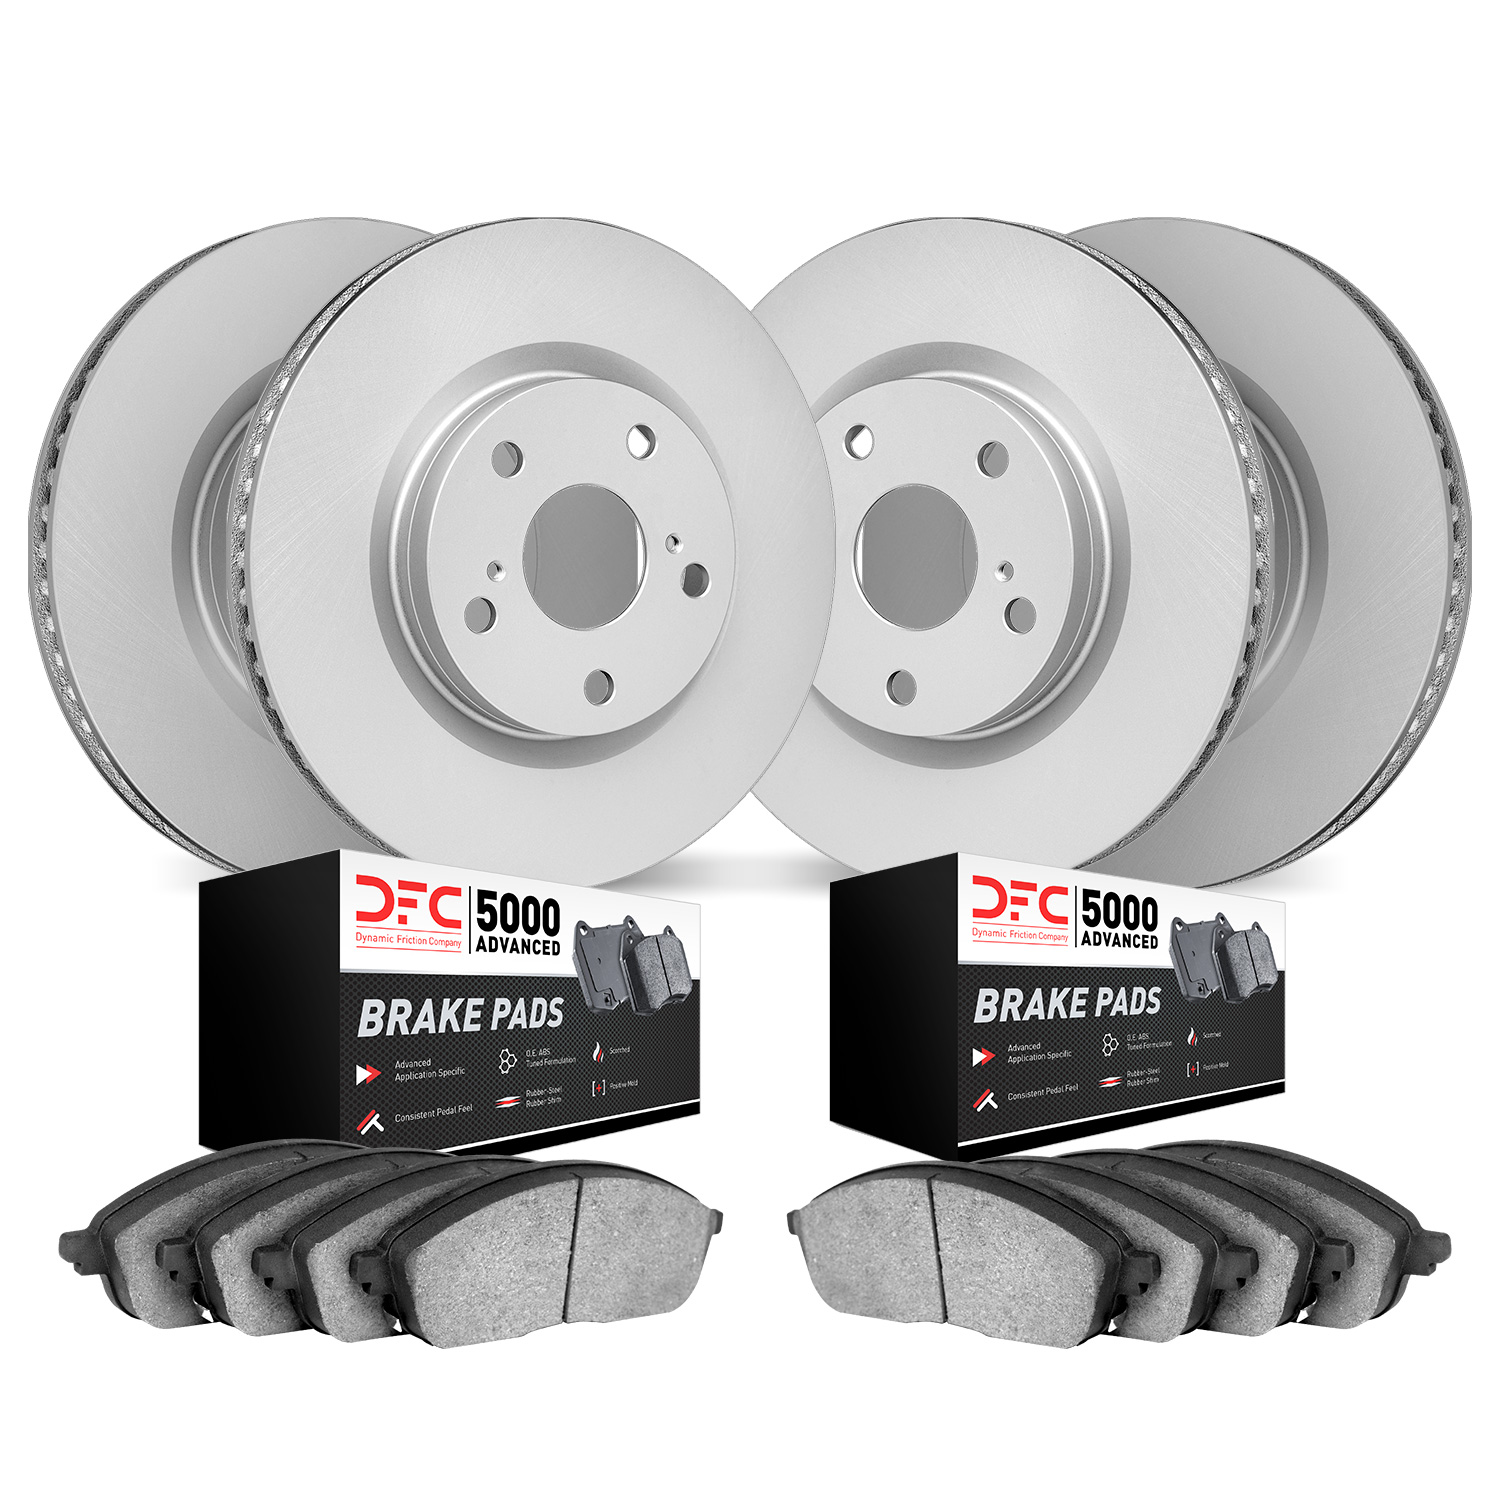 4504-63031 Geospec Brake Rotors w/5000 Advanced Brake Pads Kit, 2004-2009 Mercedes-Benz, Position: Front and Rear